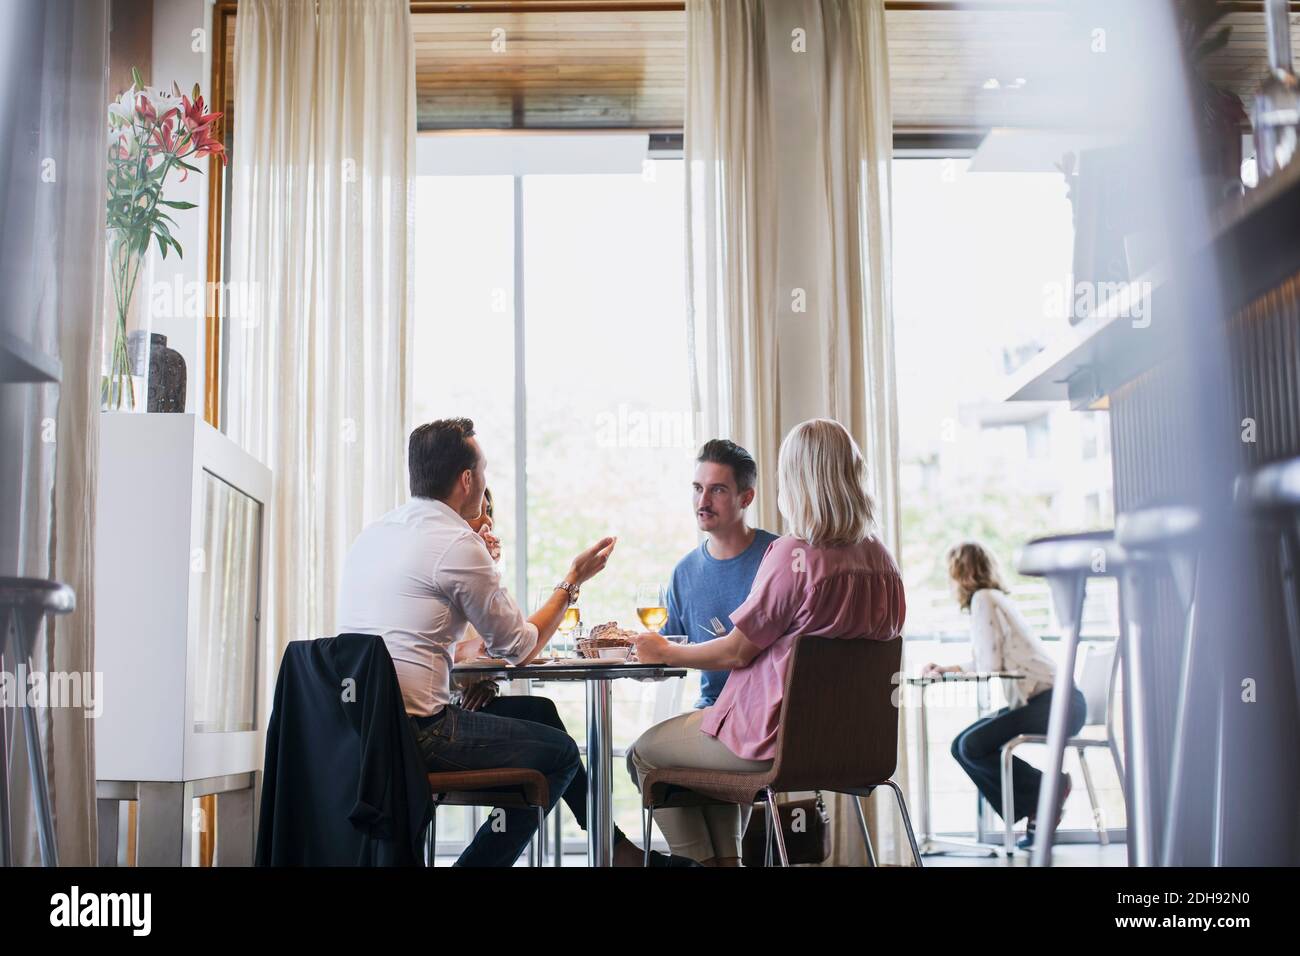 Business colleagues talking while eating lunch during meeting at restaurant Stock Photo